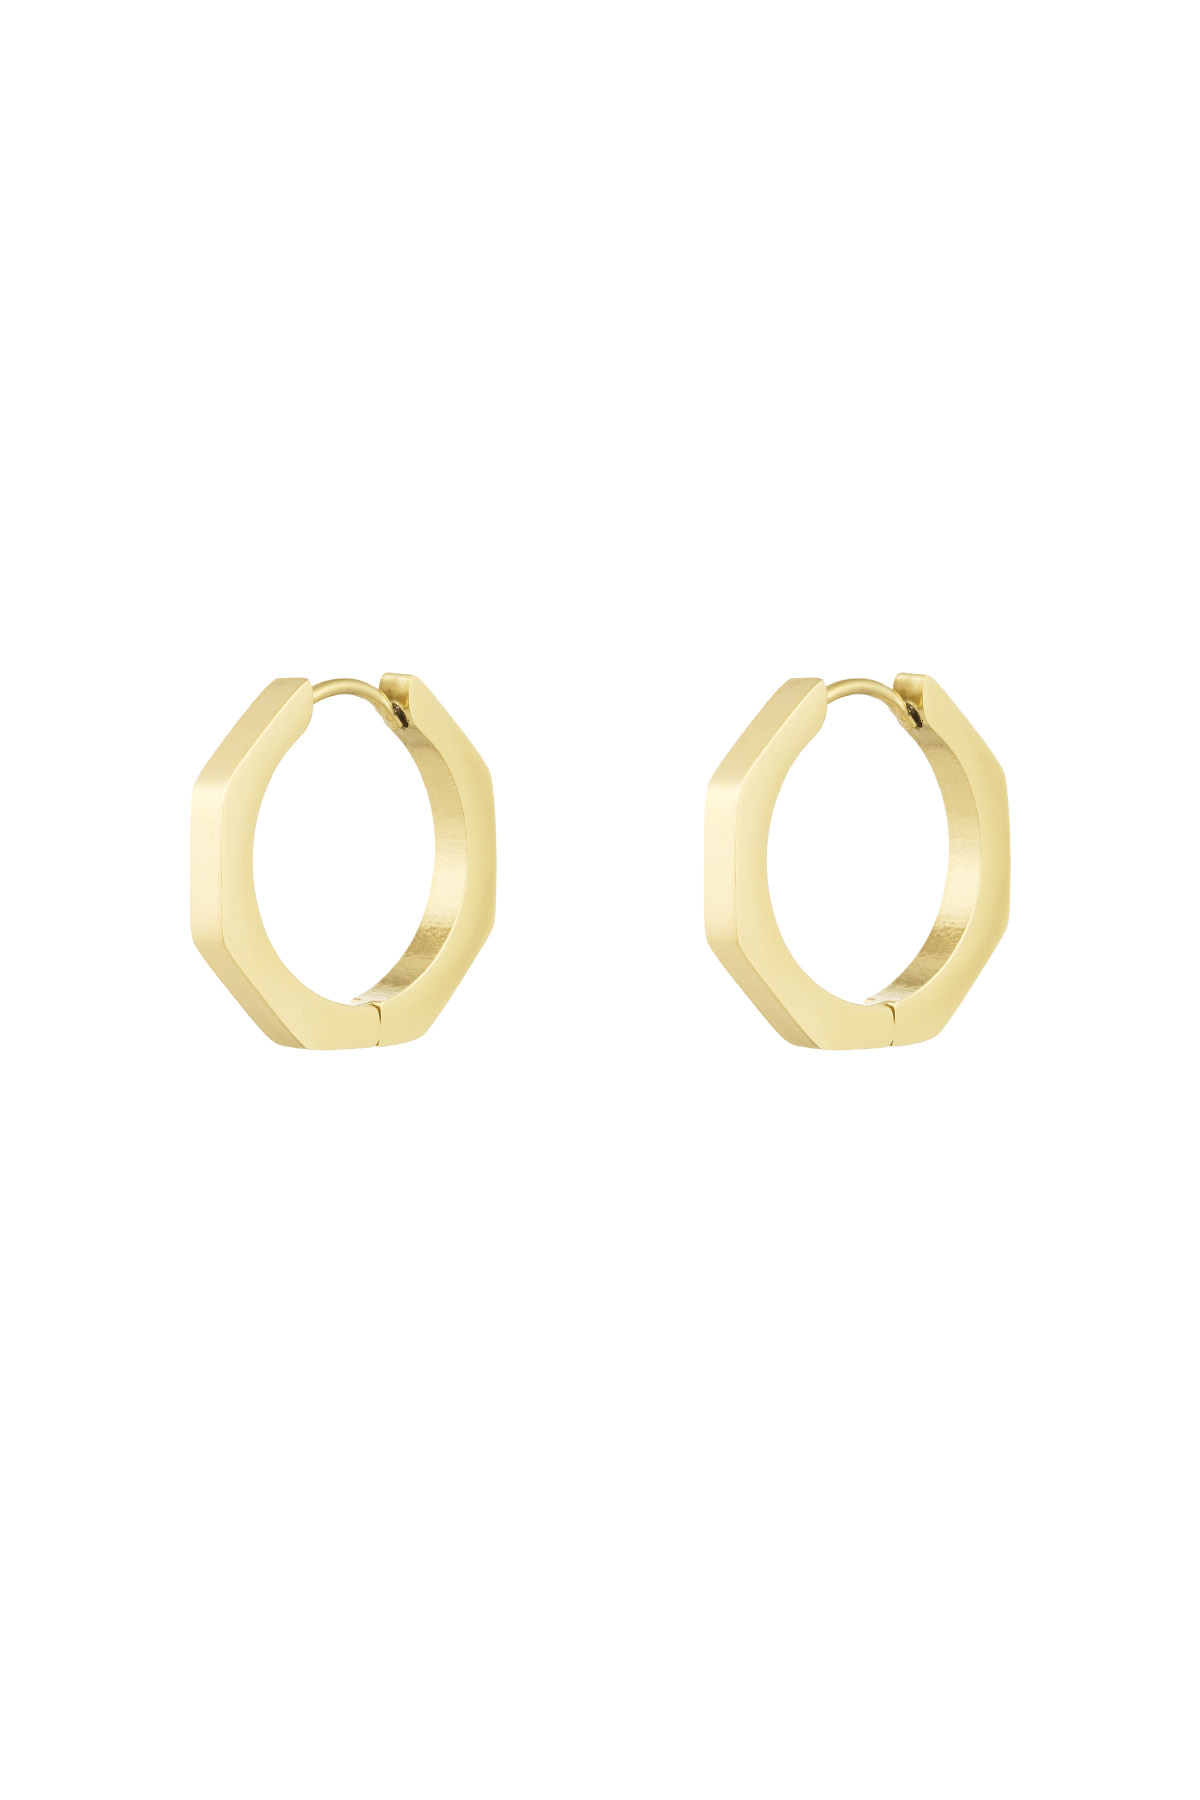 Classic round earrings large - gold  h5 